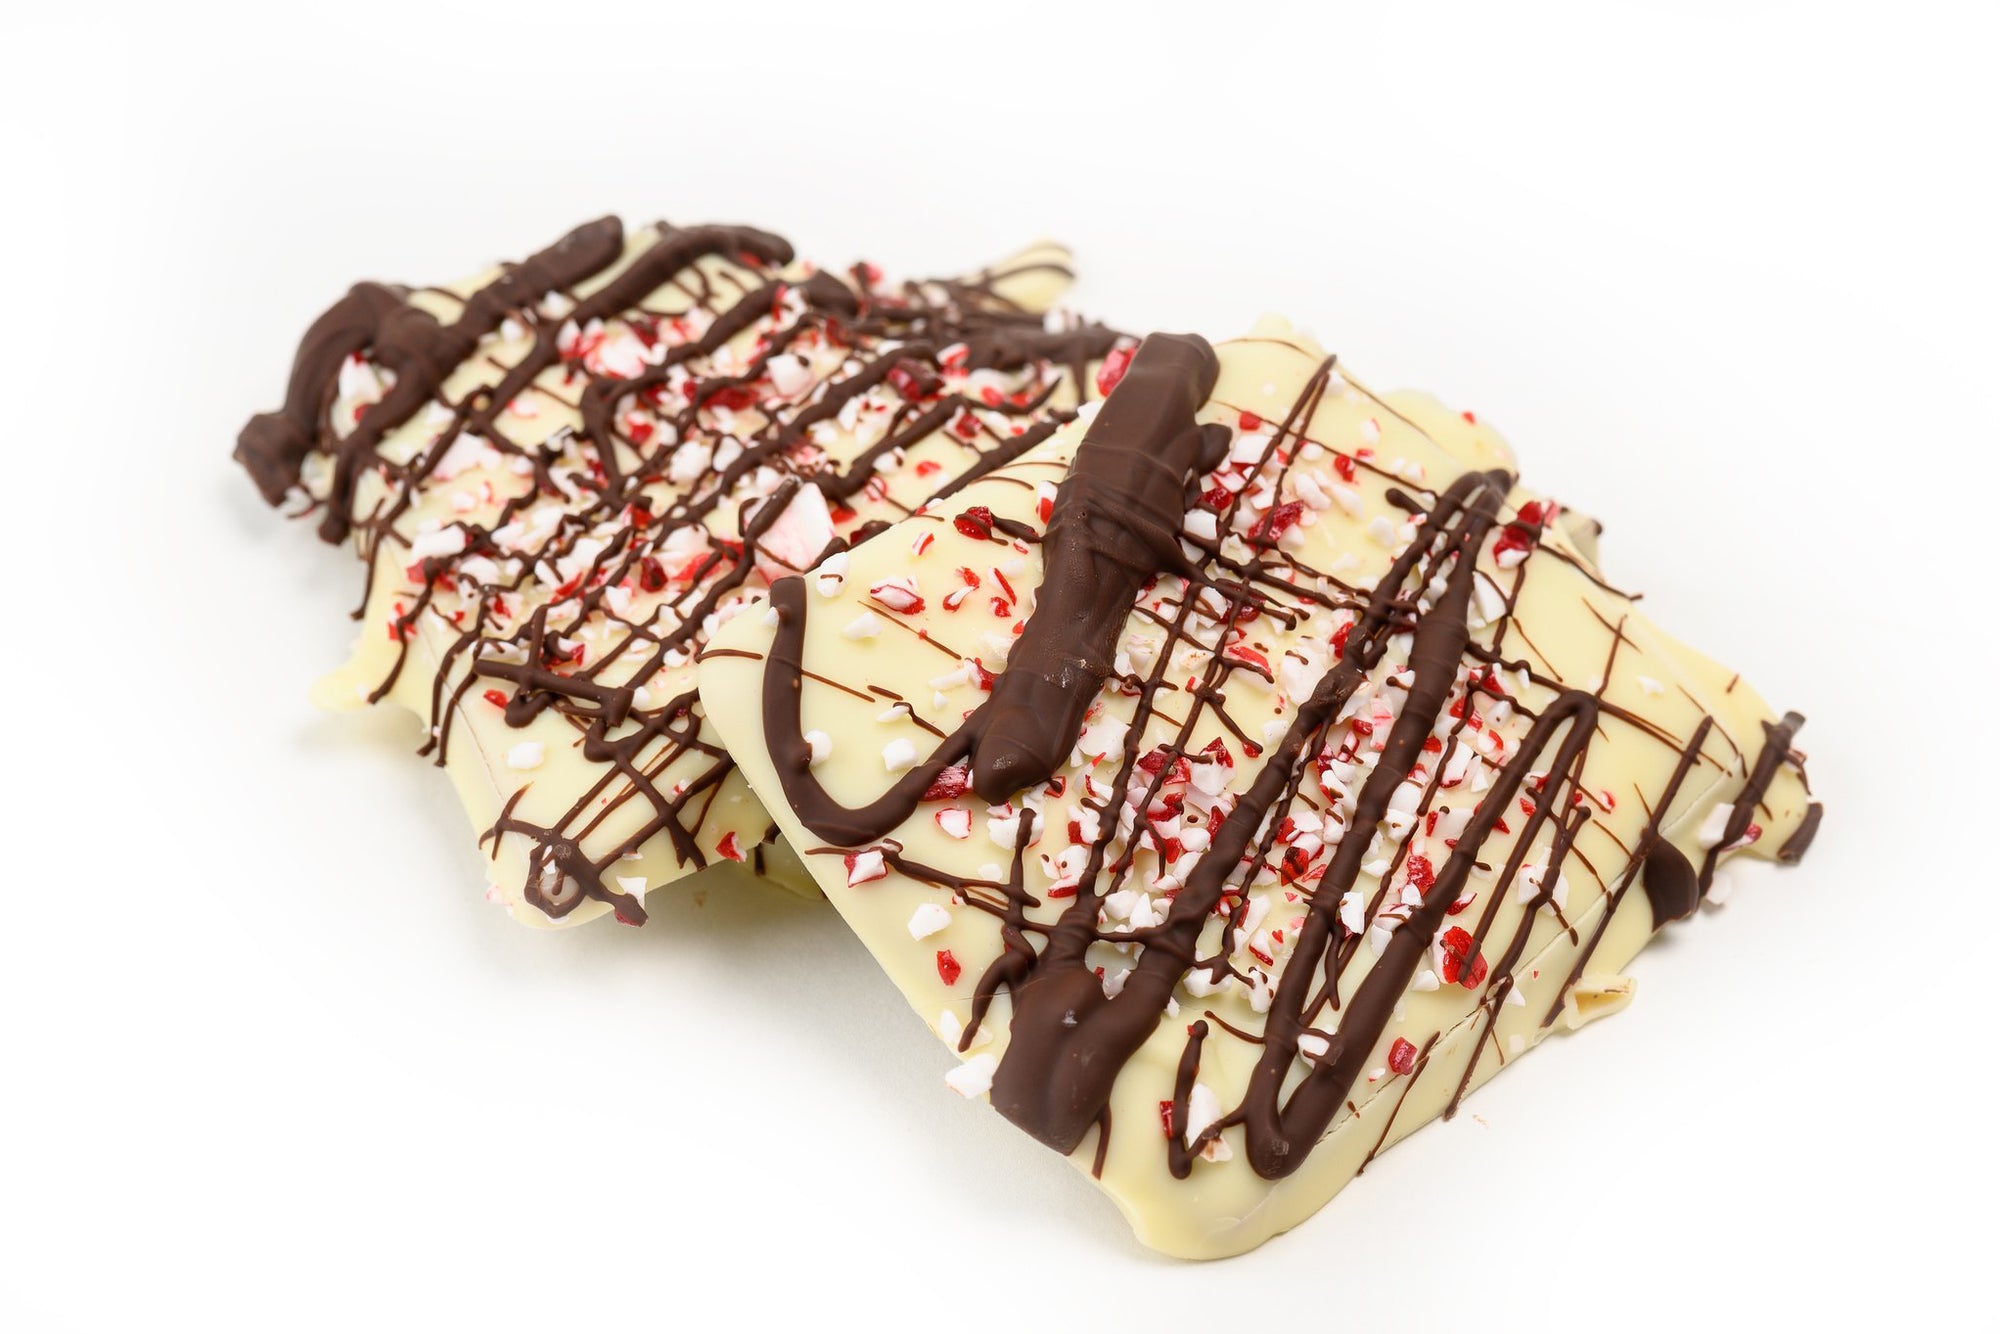 White Peppermint Toffee - CSTsweets